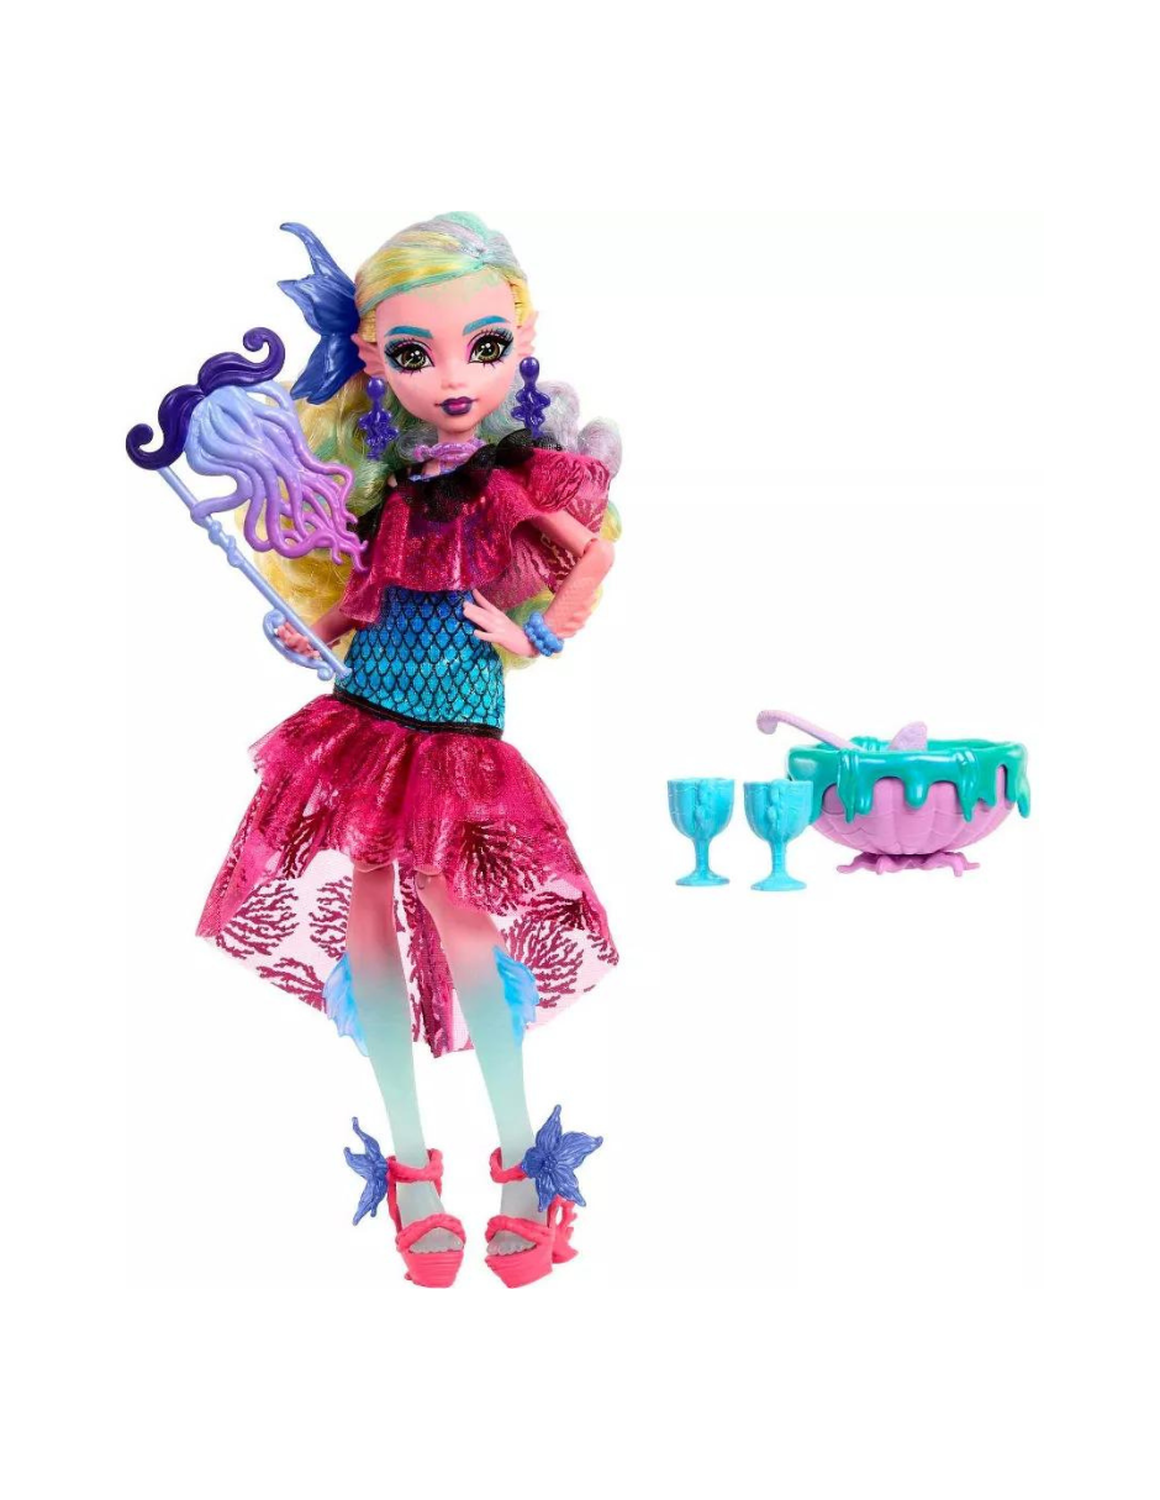 Monster High Lagoona Blue Fashion in Monster Ball Party Dress